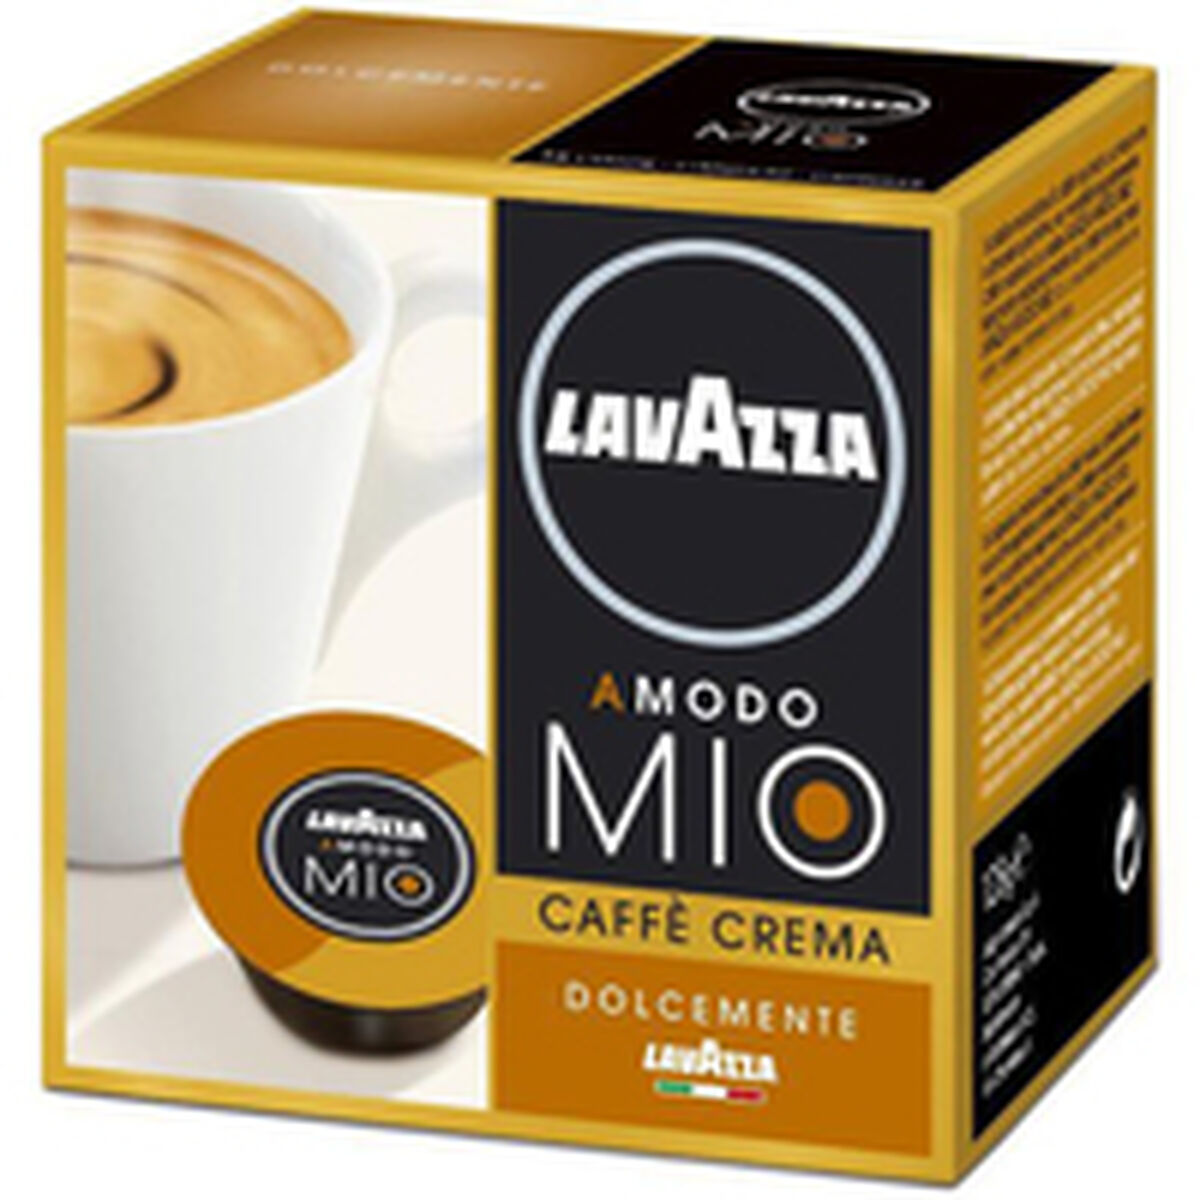 Koffiecapsules Lavazza LUNGO DOLCE (16 Stuks) (16 uds)